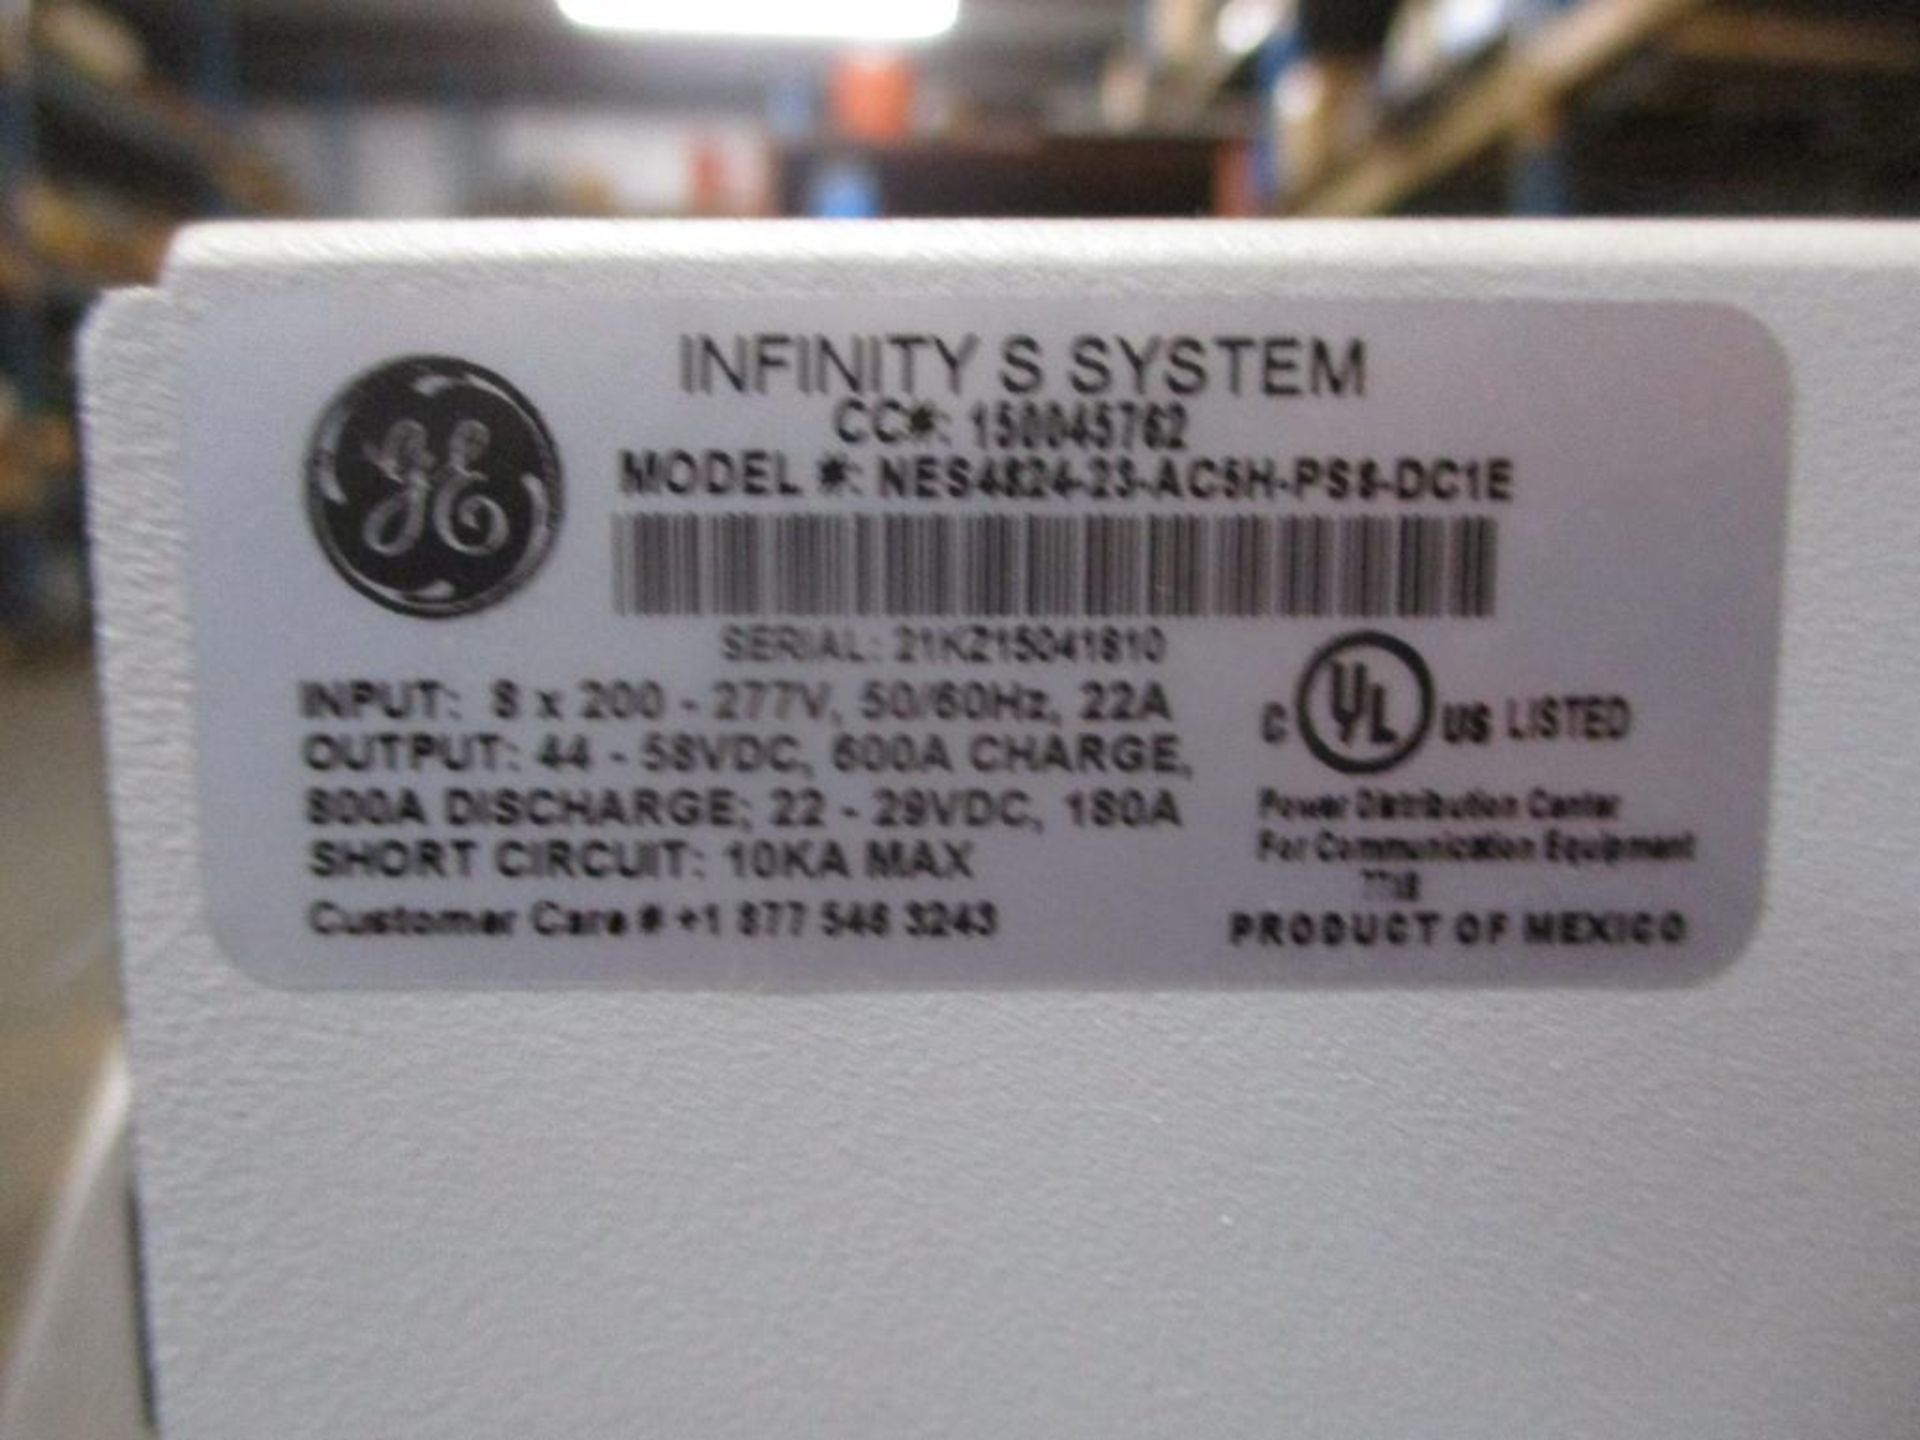 GE Infinity System, Model NES4824-23-AC5H-PS8-DC1E - Image 4 of 4